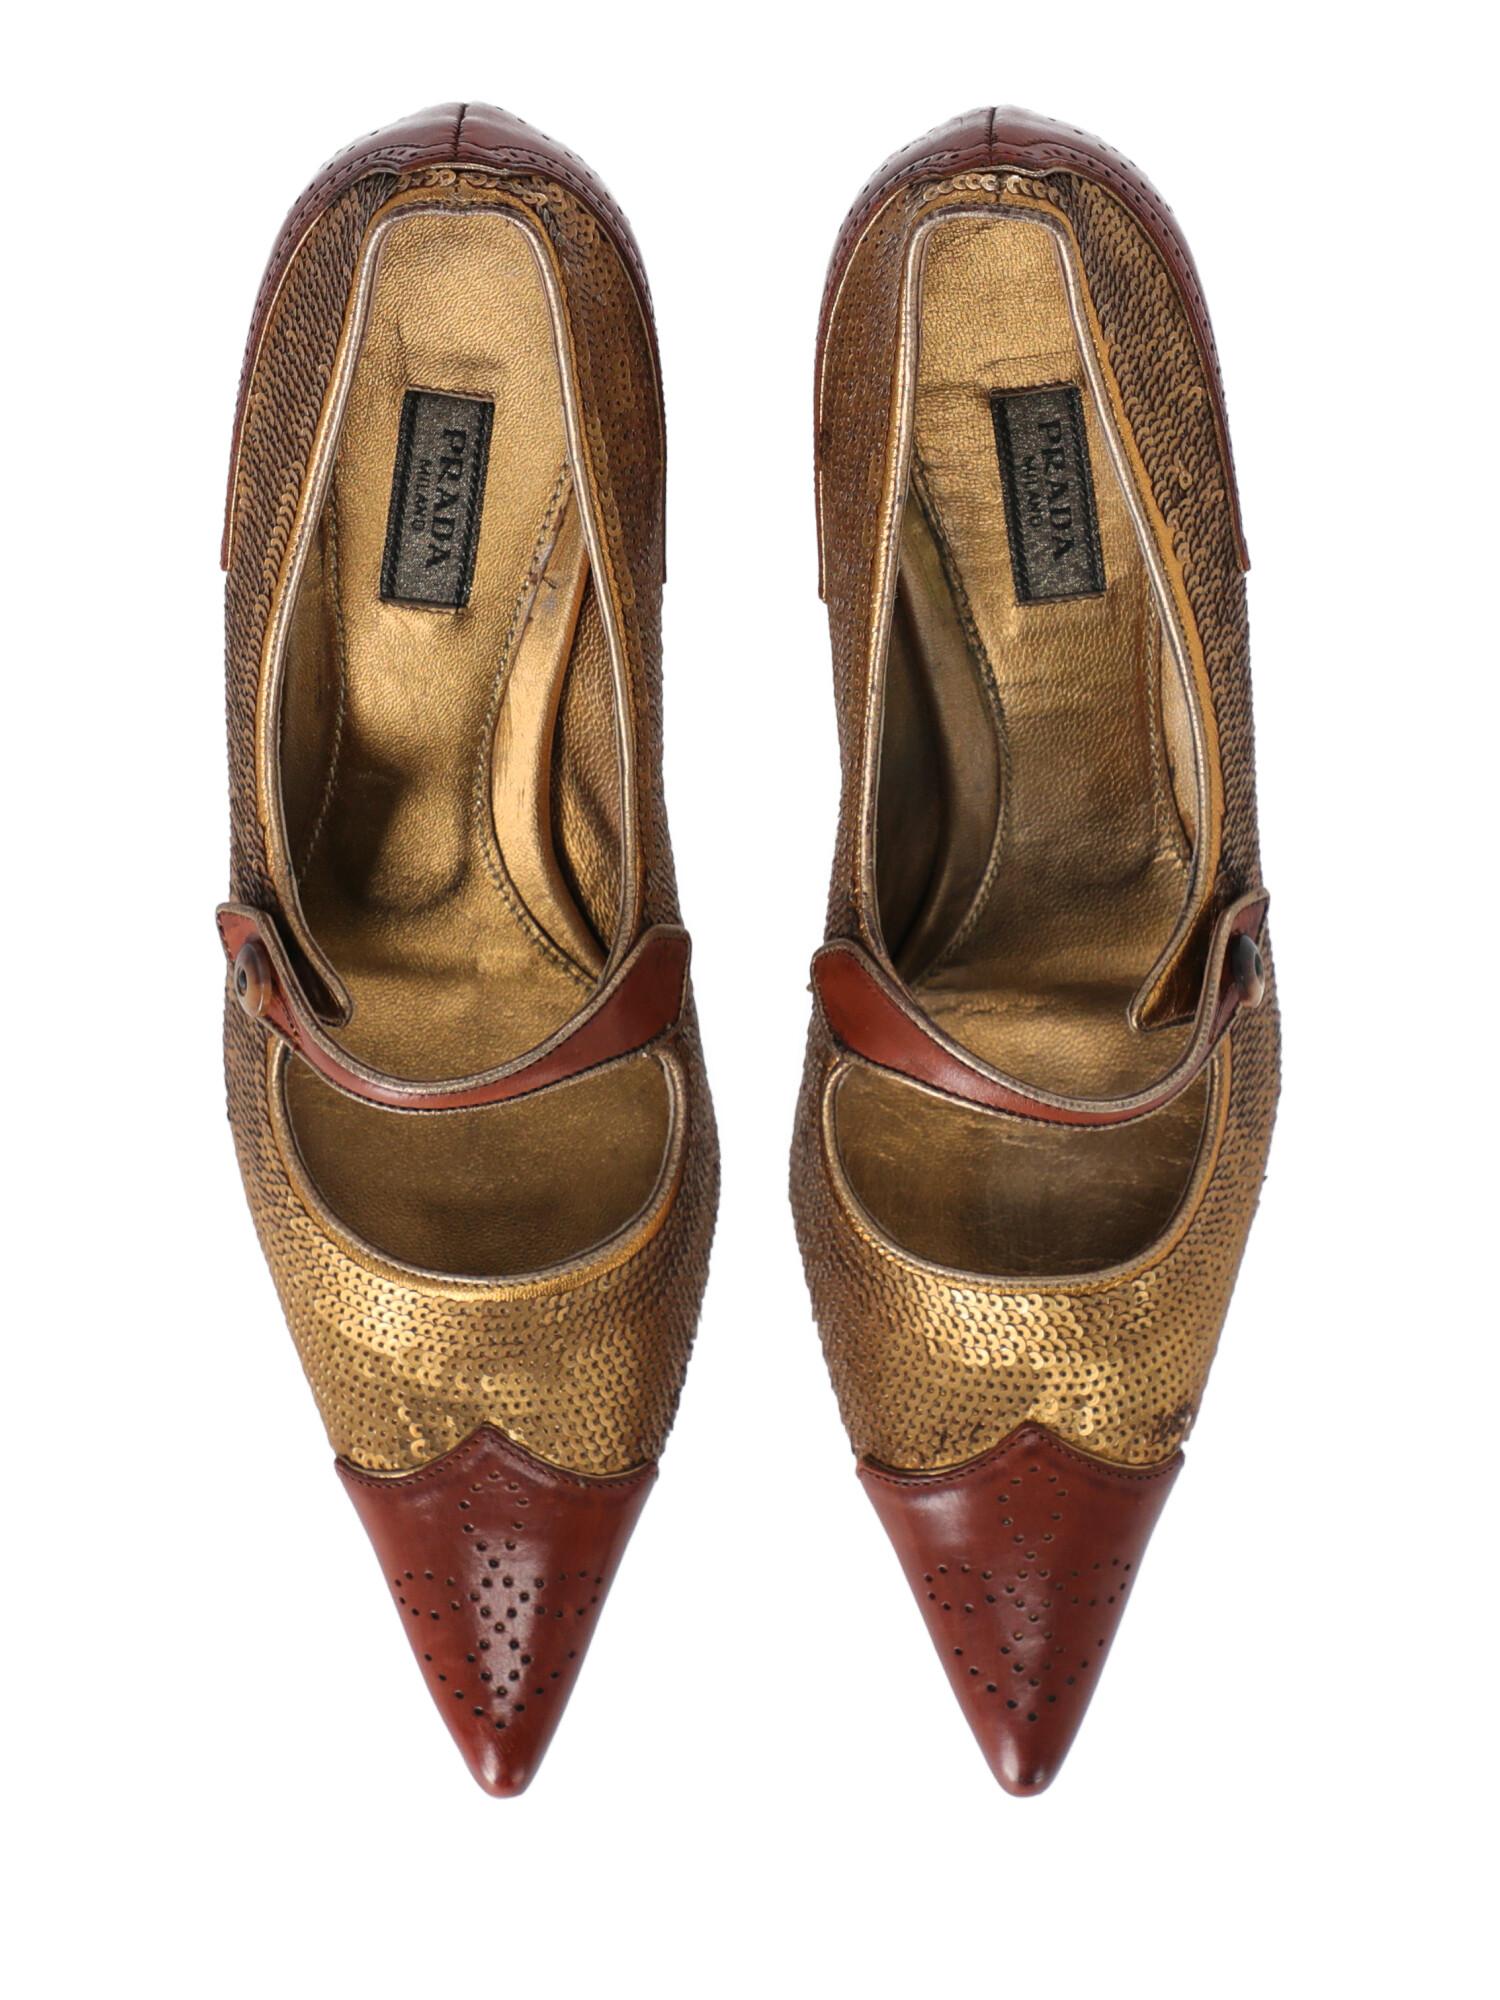 Prada Woman Pumps Brown Leather IT 35.5 For Sale 2